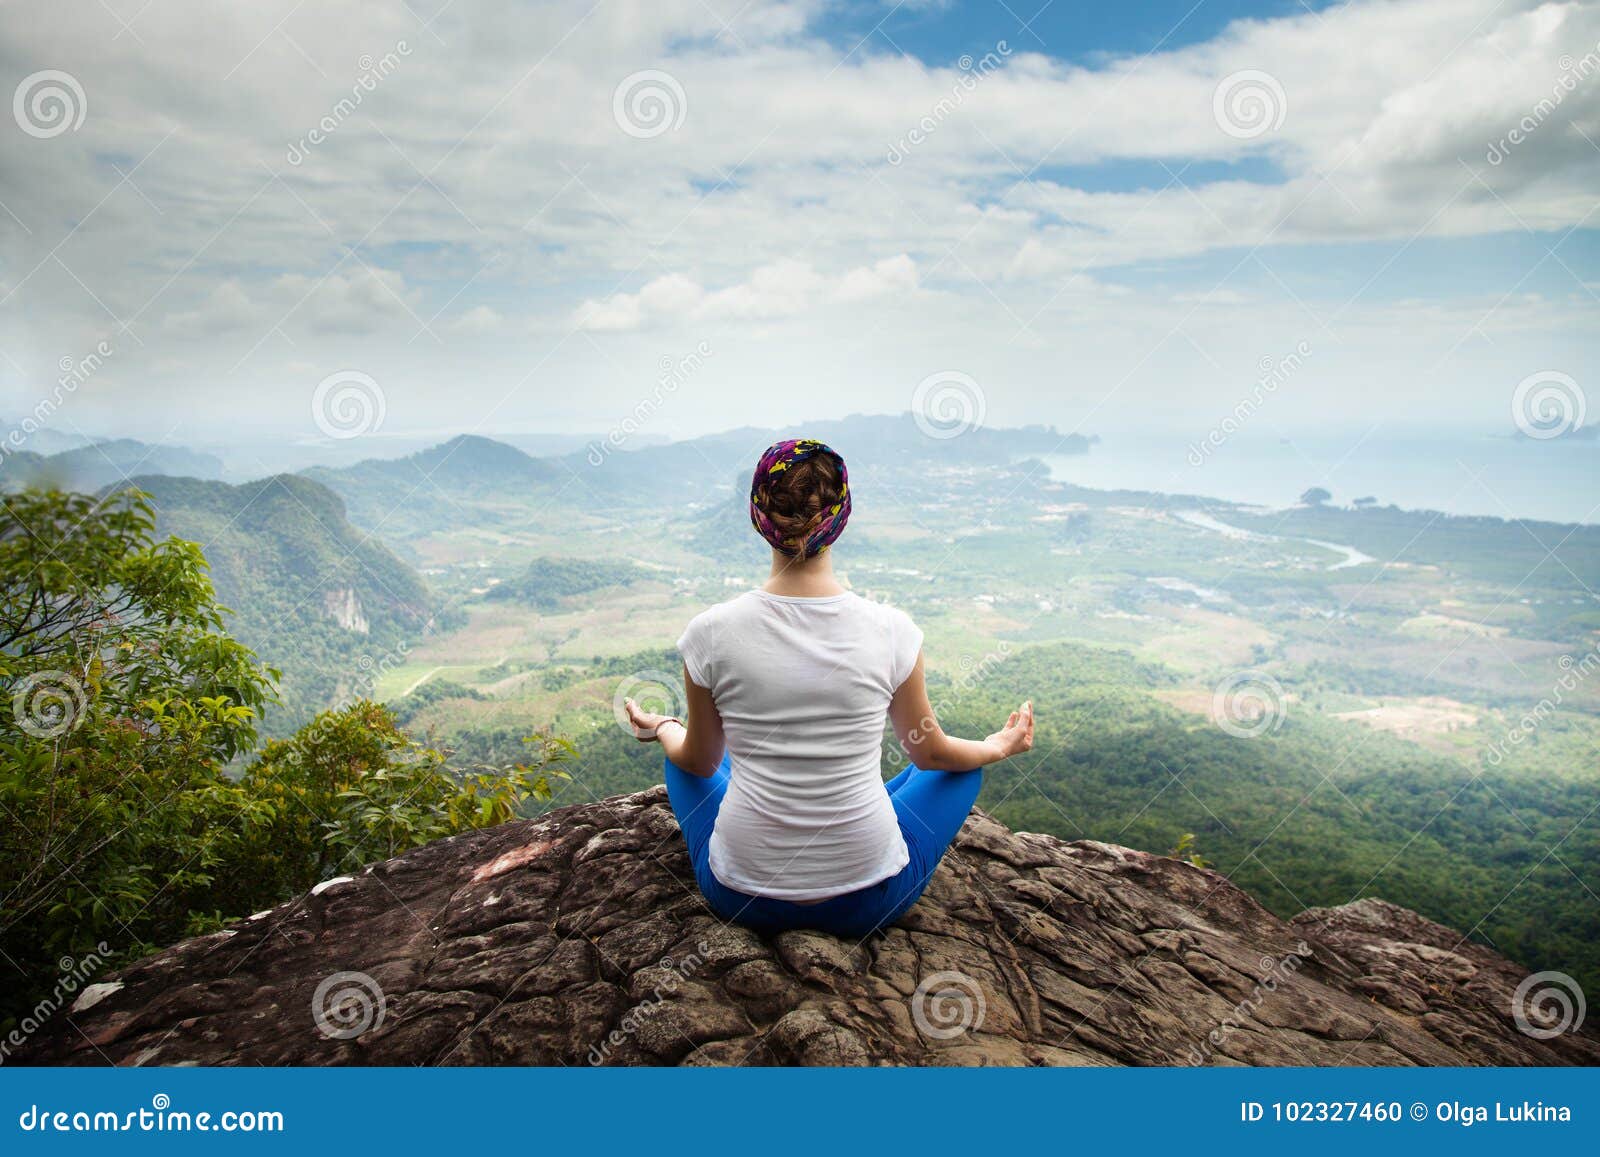 young blonde woman practicing yoga and meditation in mountains during luxury yoga retreat in bali, asia